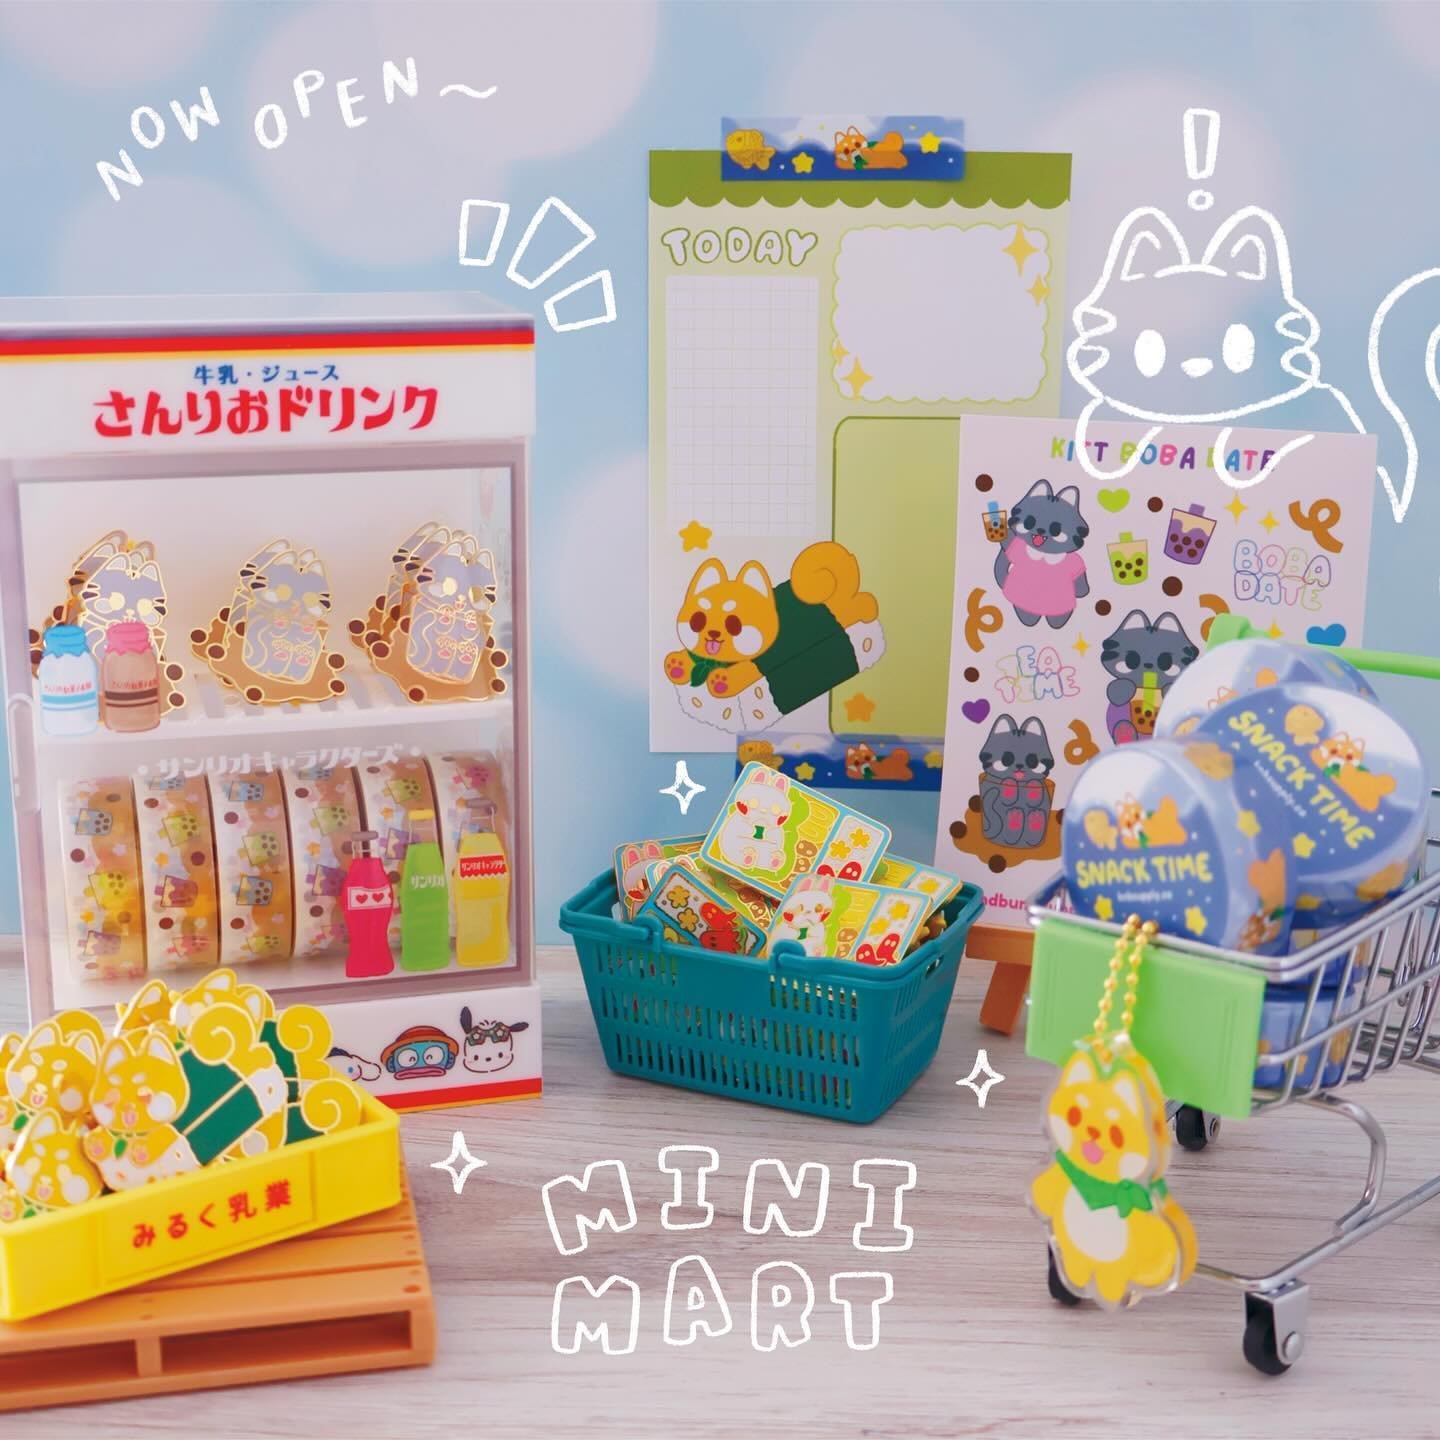 🛒 Snack Master Musu the Shiba&rsquo;s lil&rsquo; Mini Mart ~ from Musu-bis, to stationery AND even boba 🧋🤤 

What would you pickup from Musu&rsquo;s mini mart?  I&rsquo;d definitely fill up my cart with ✨BOBA✨ &amp; some washi tape of course 😋

&